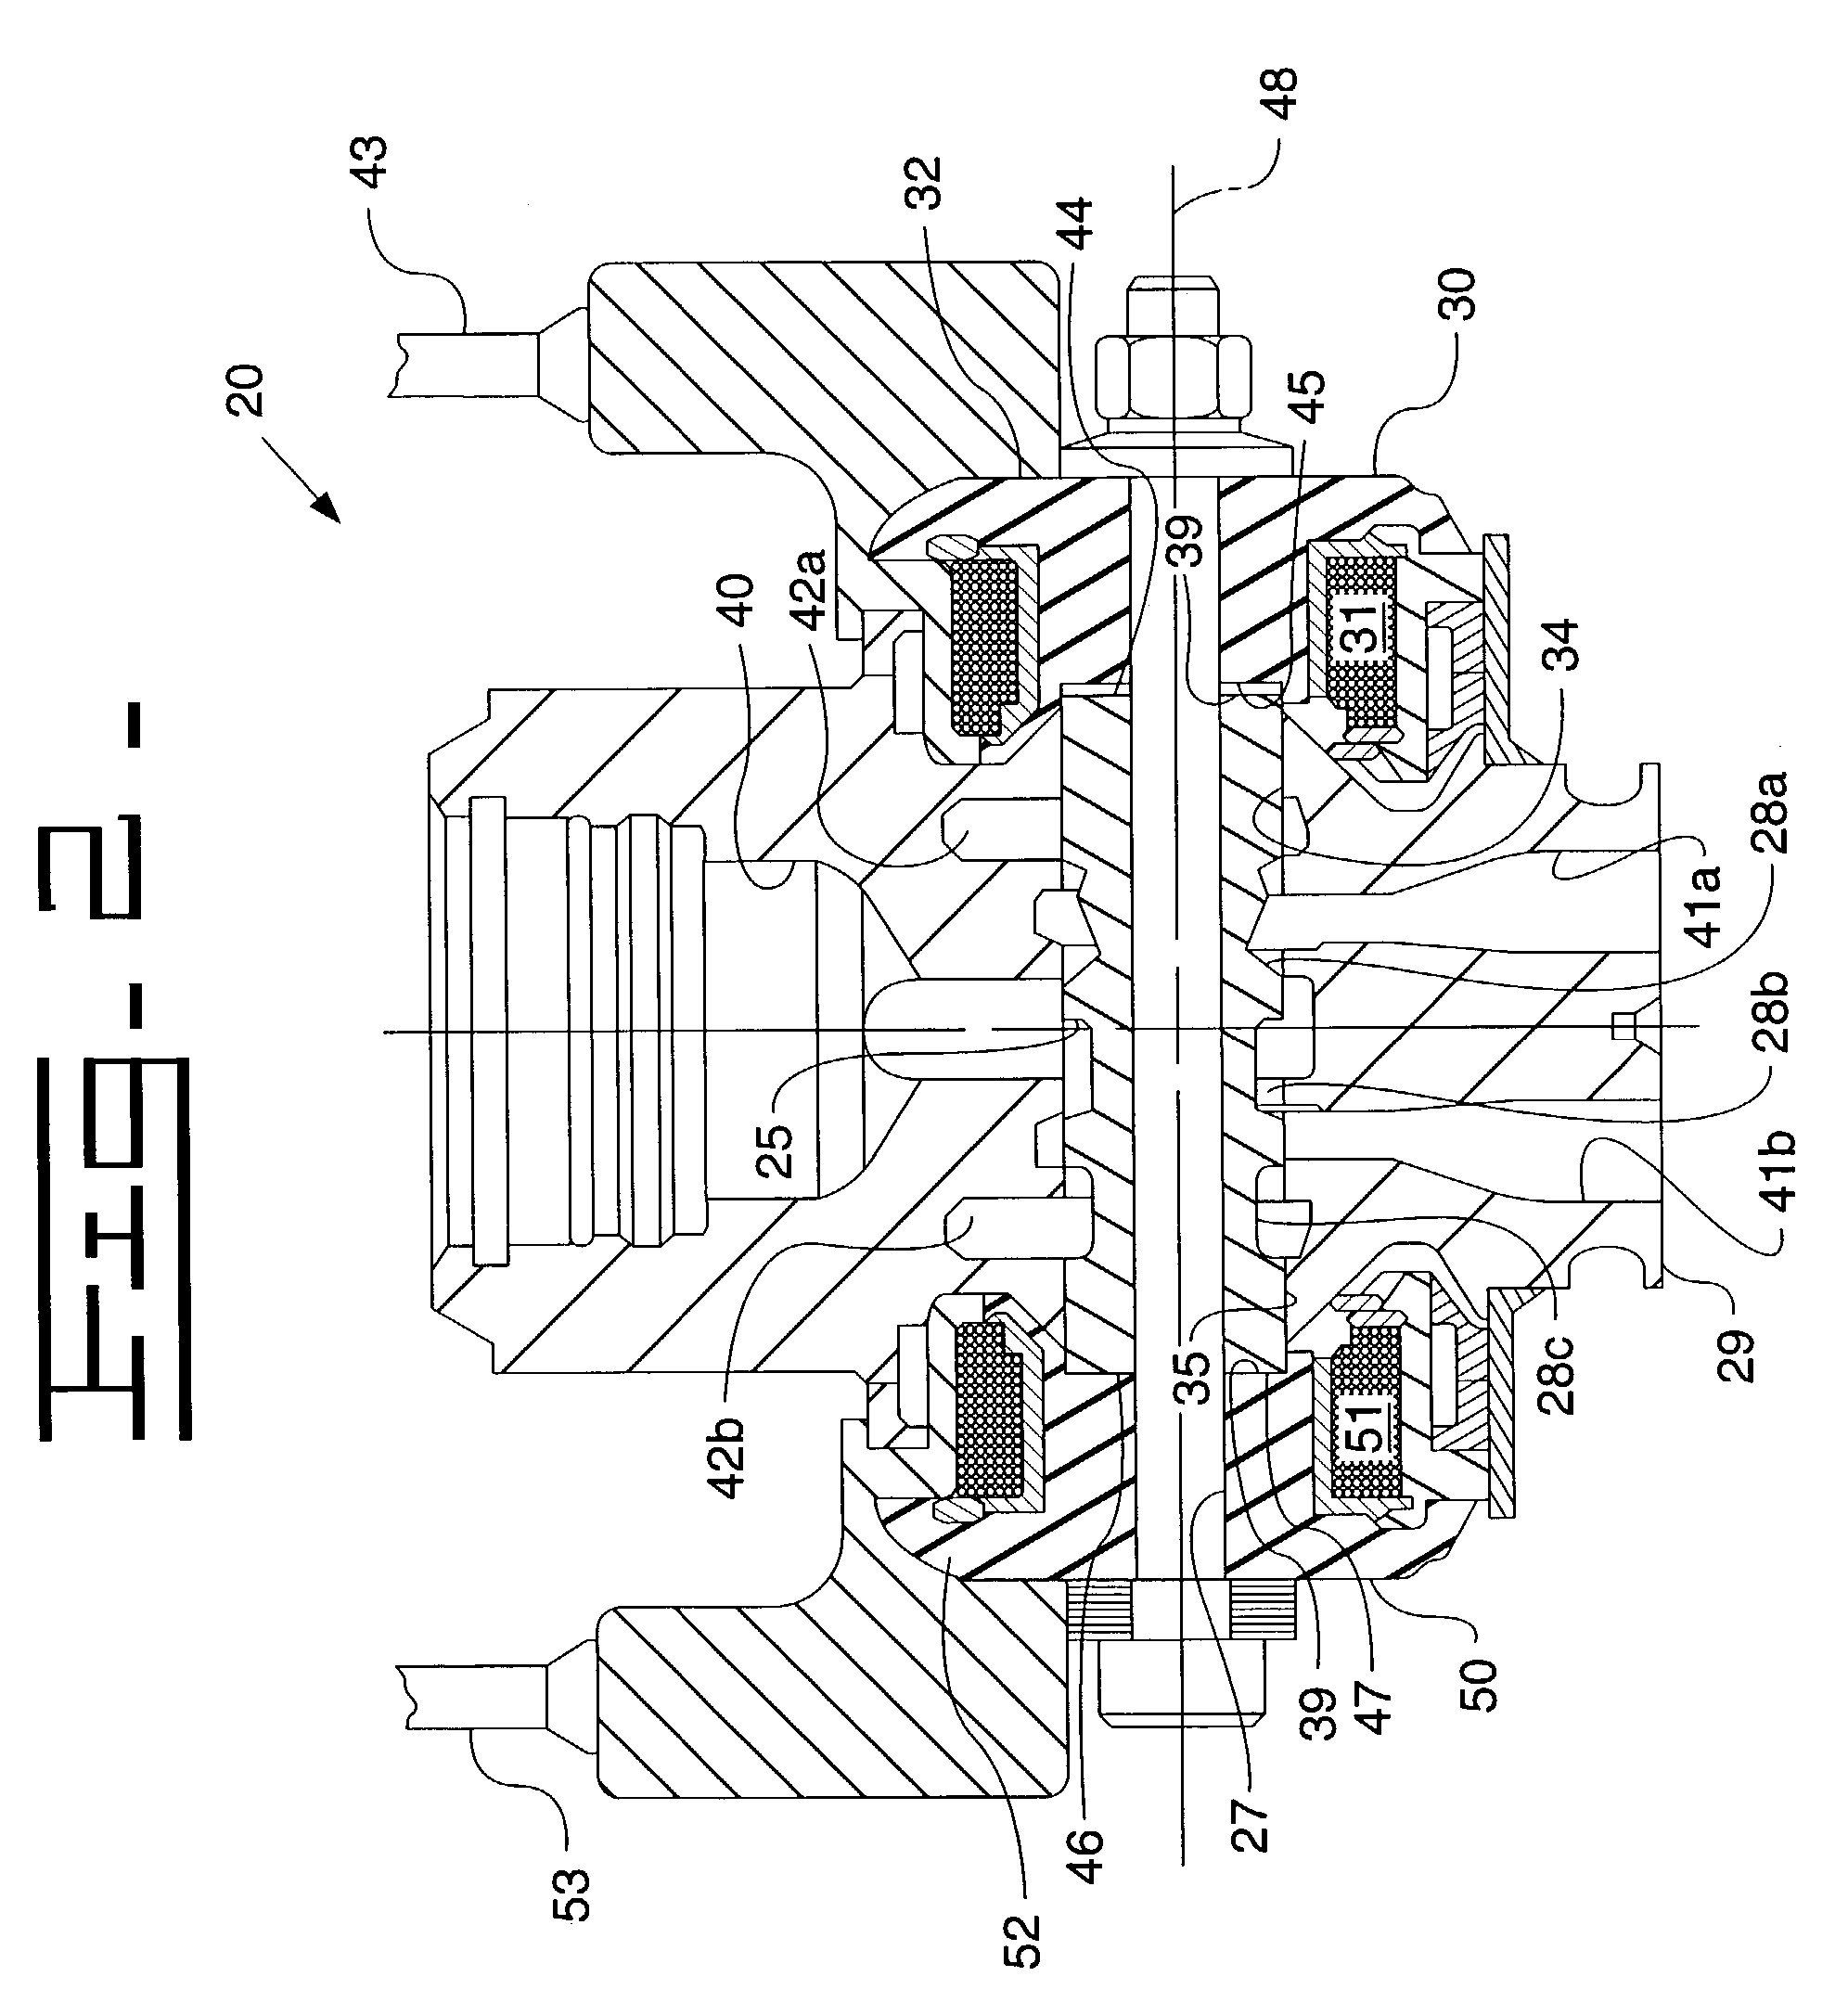 Hard coating of an impact surface of a solenoid actuator and fuel injector using same